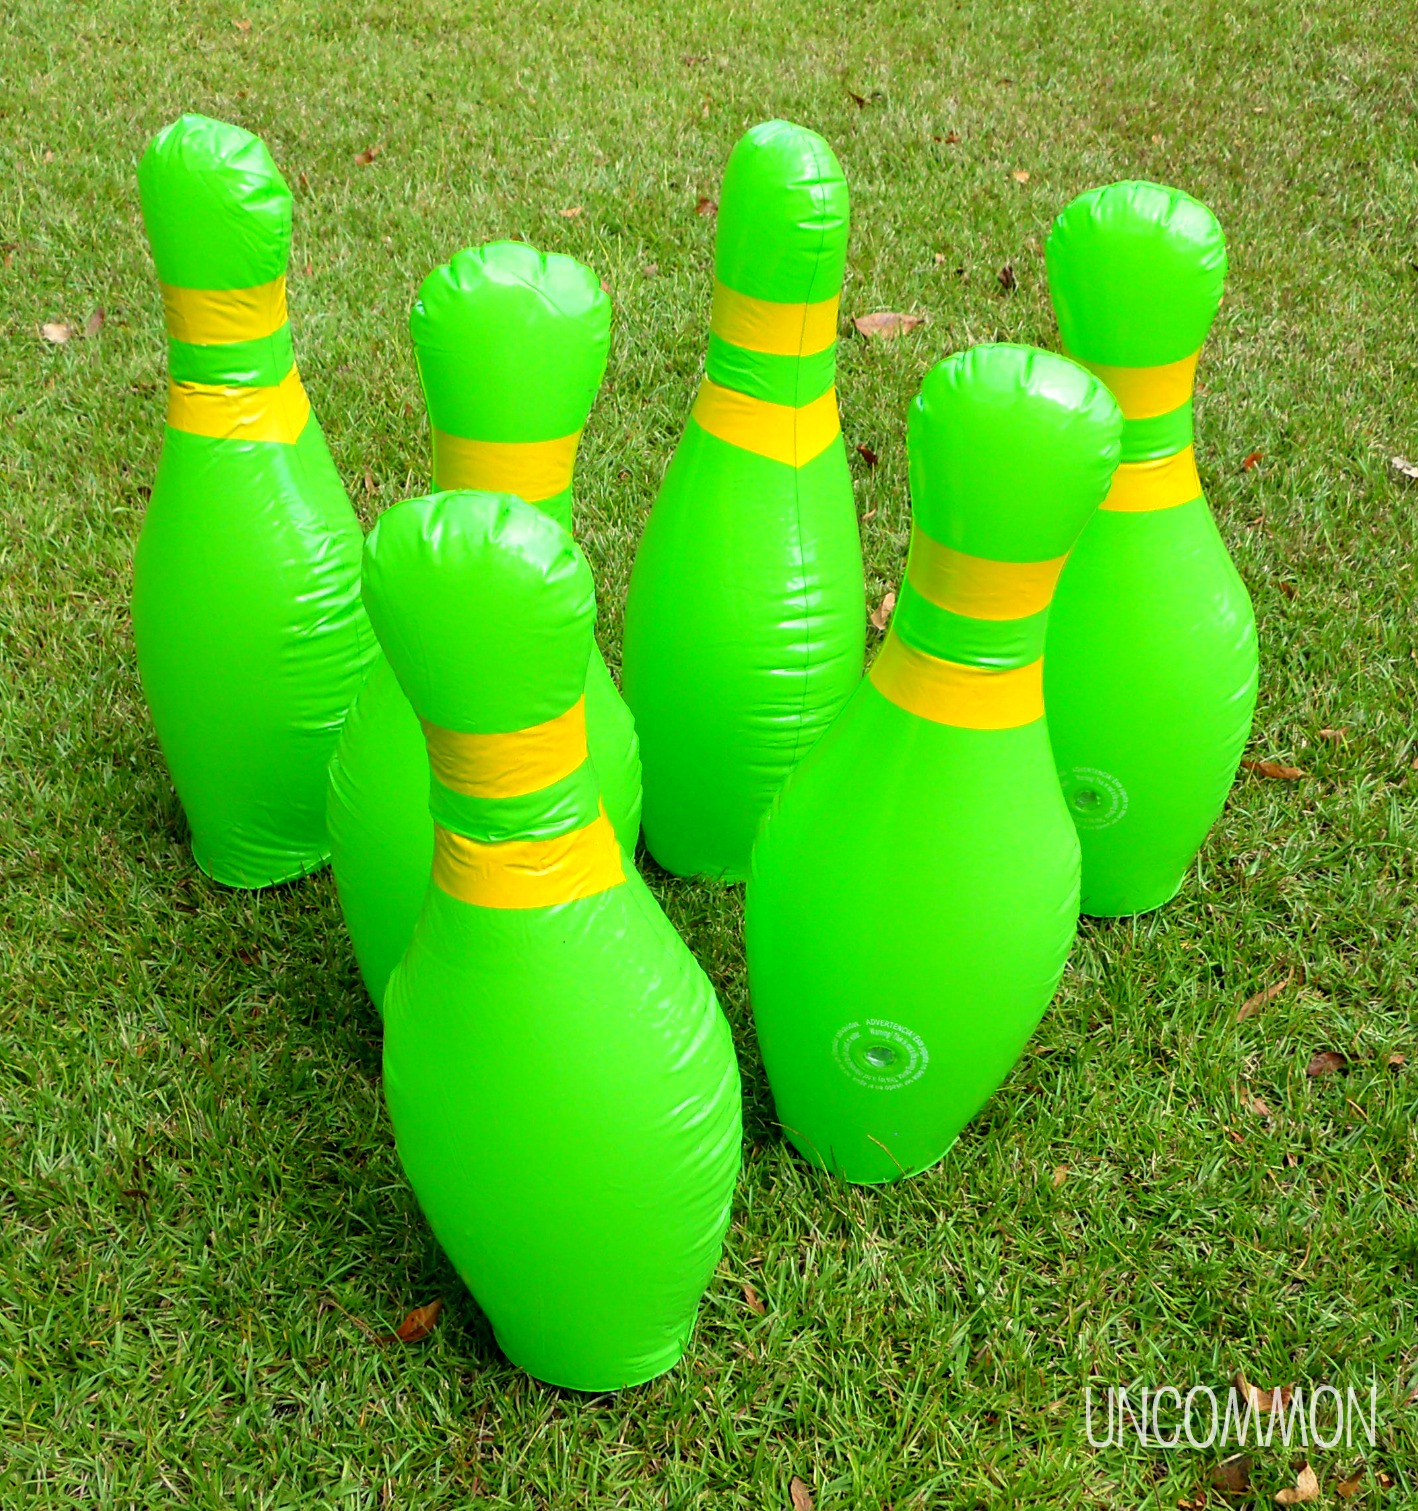 DIY Ghost Bowling Game… A Halloween Party Game